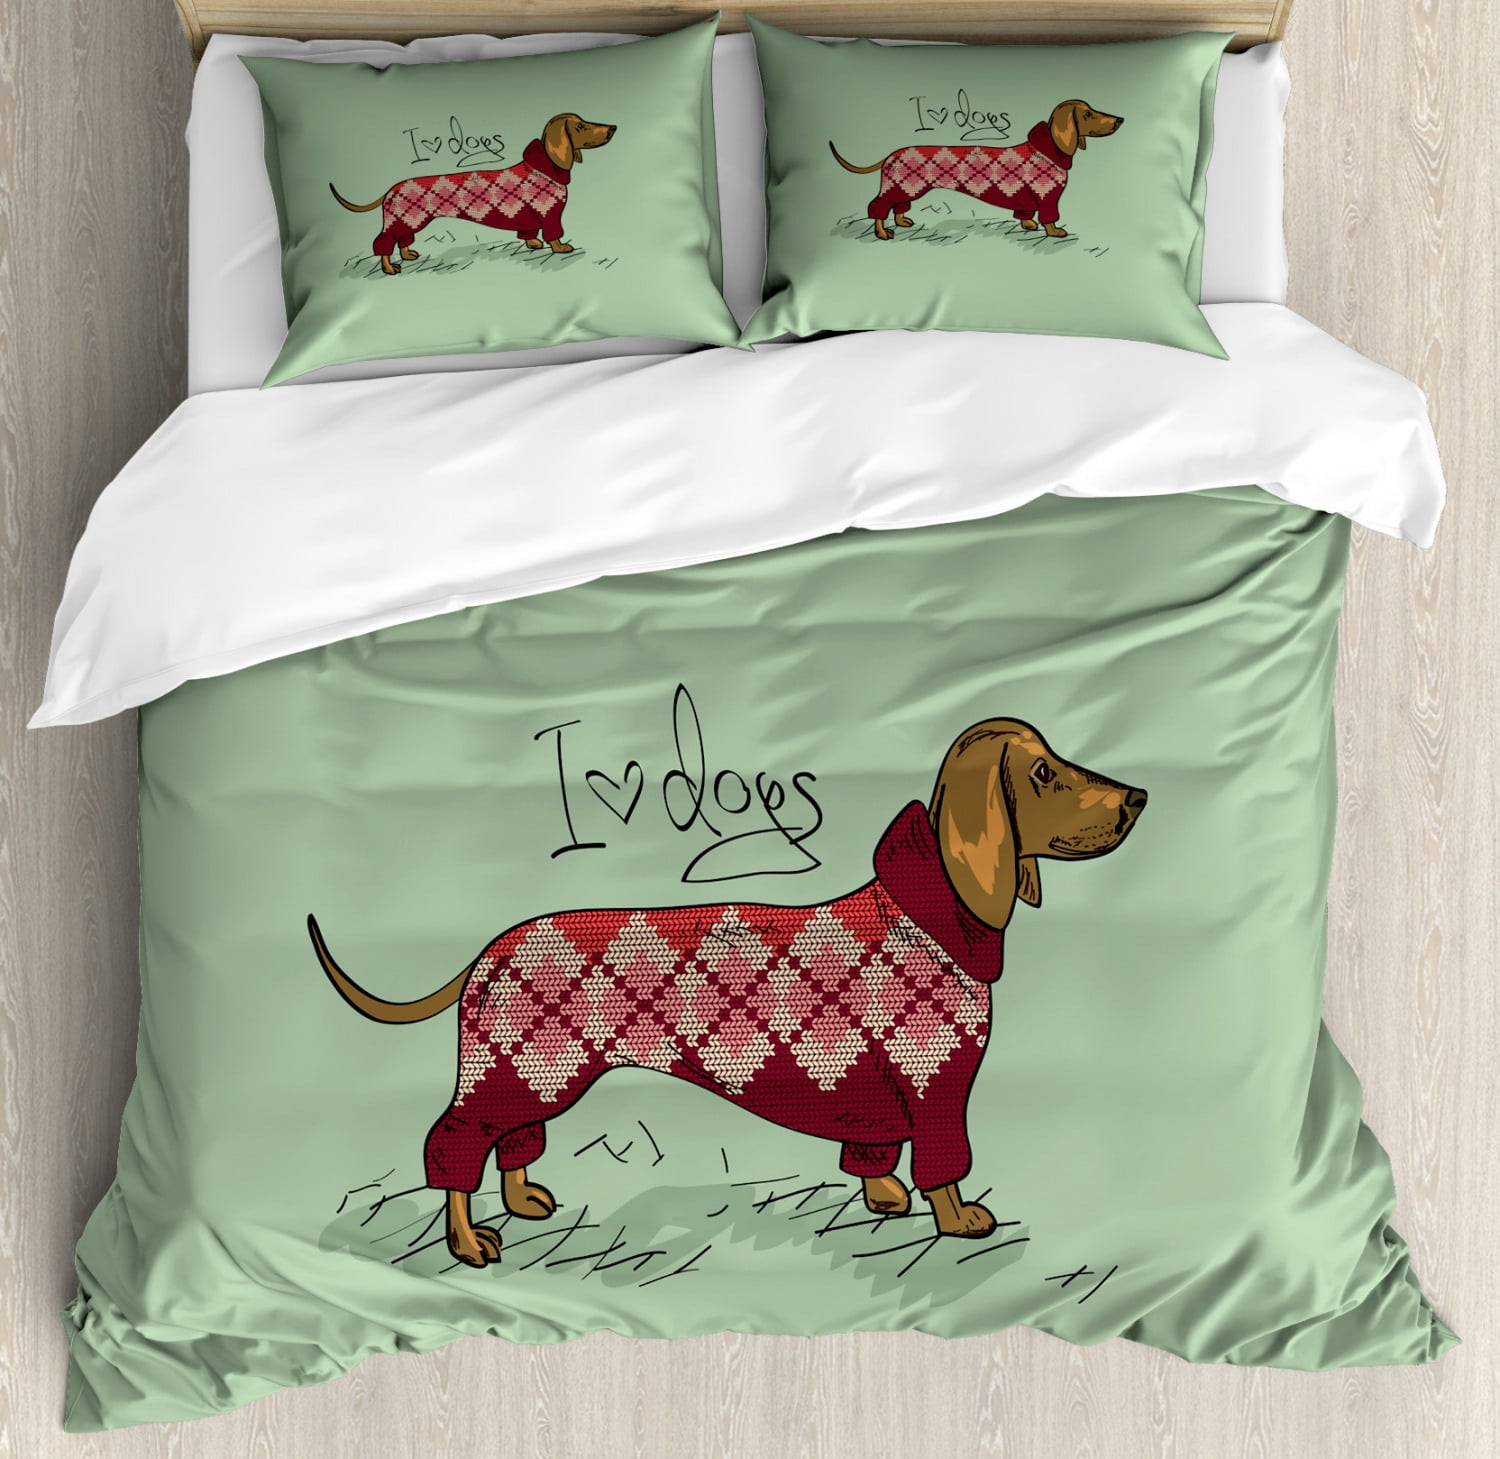 Dachshund Sausage Dog Reversible Duvet Quilt Cover Bedding Set with pillowcases 